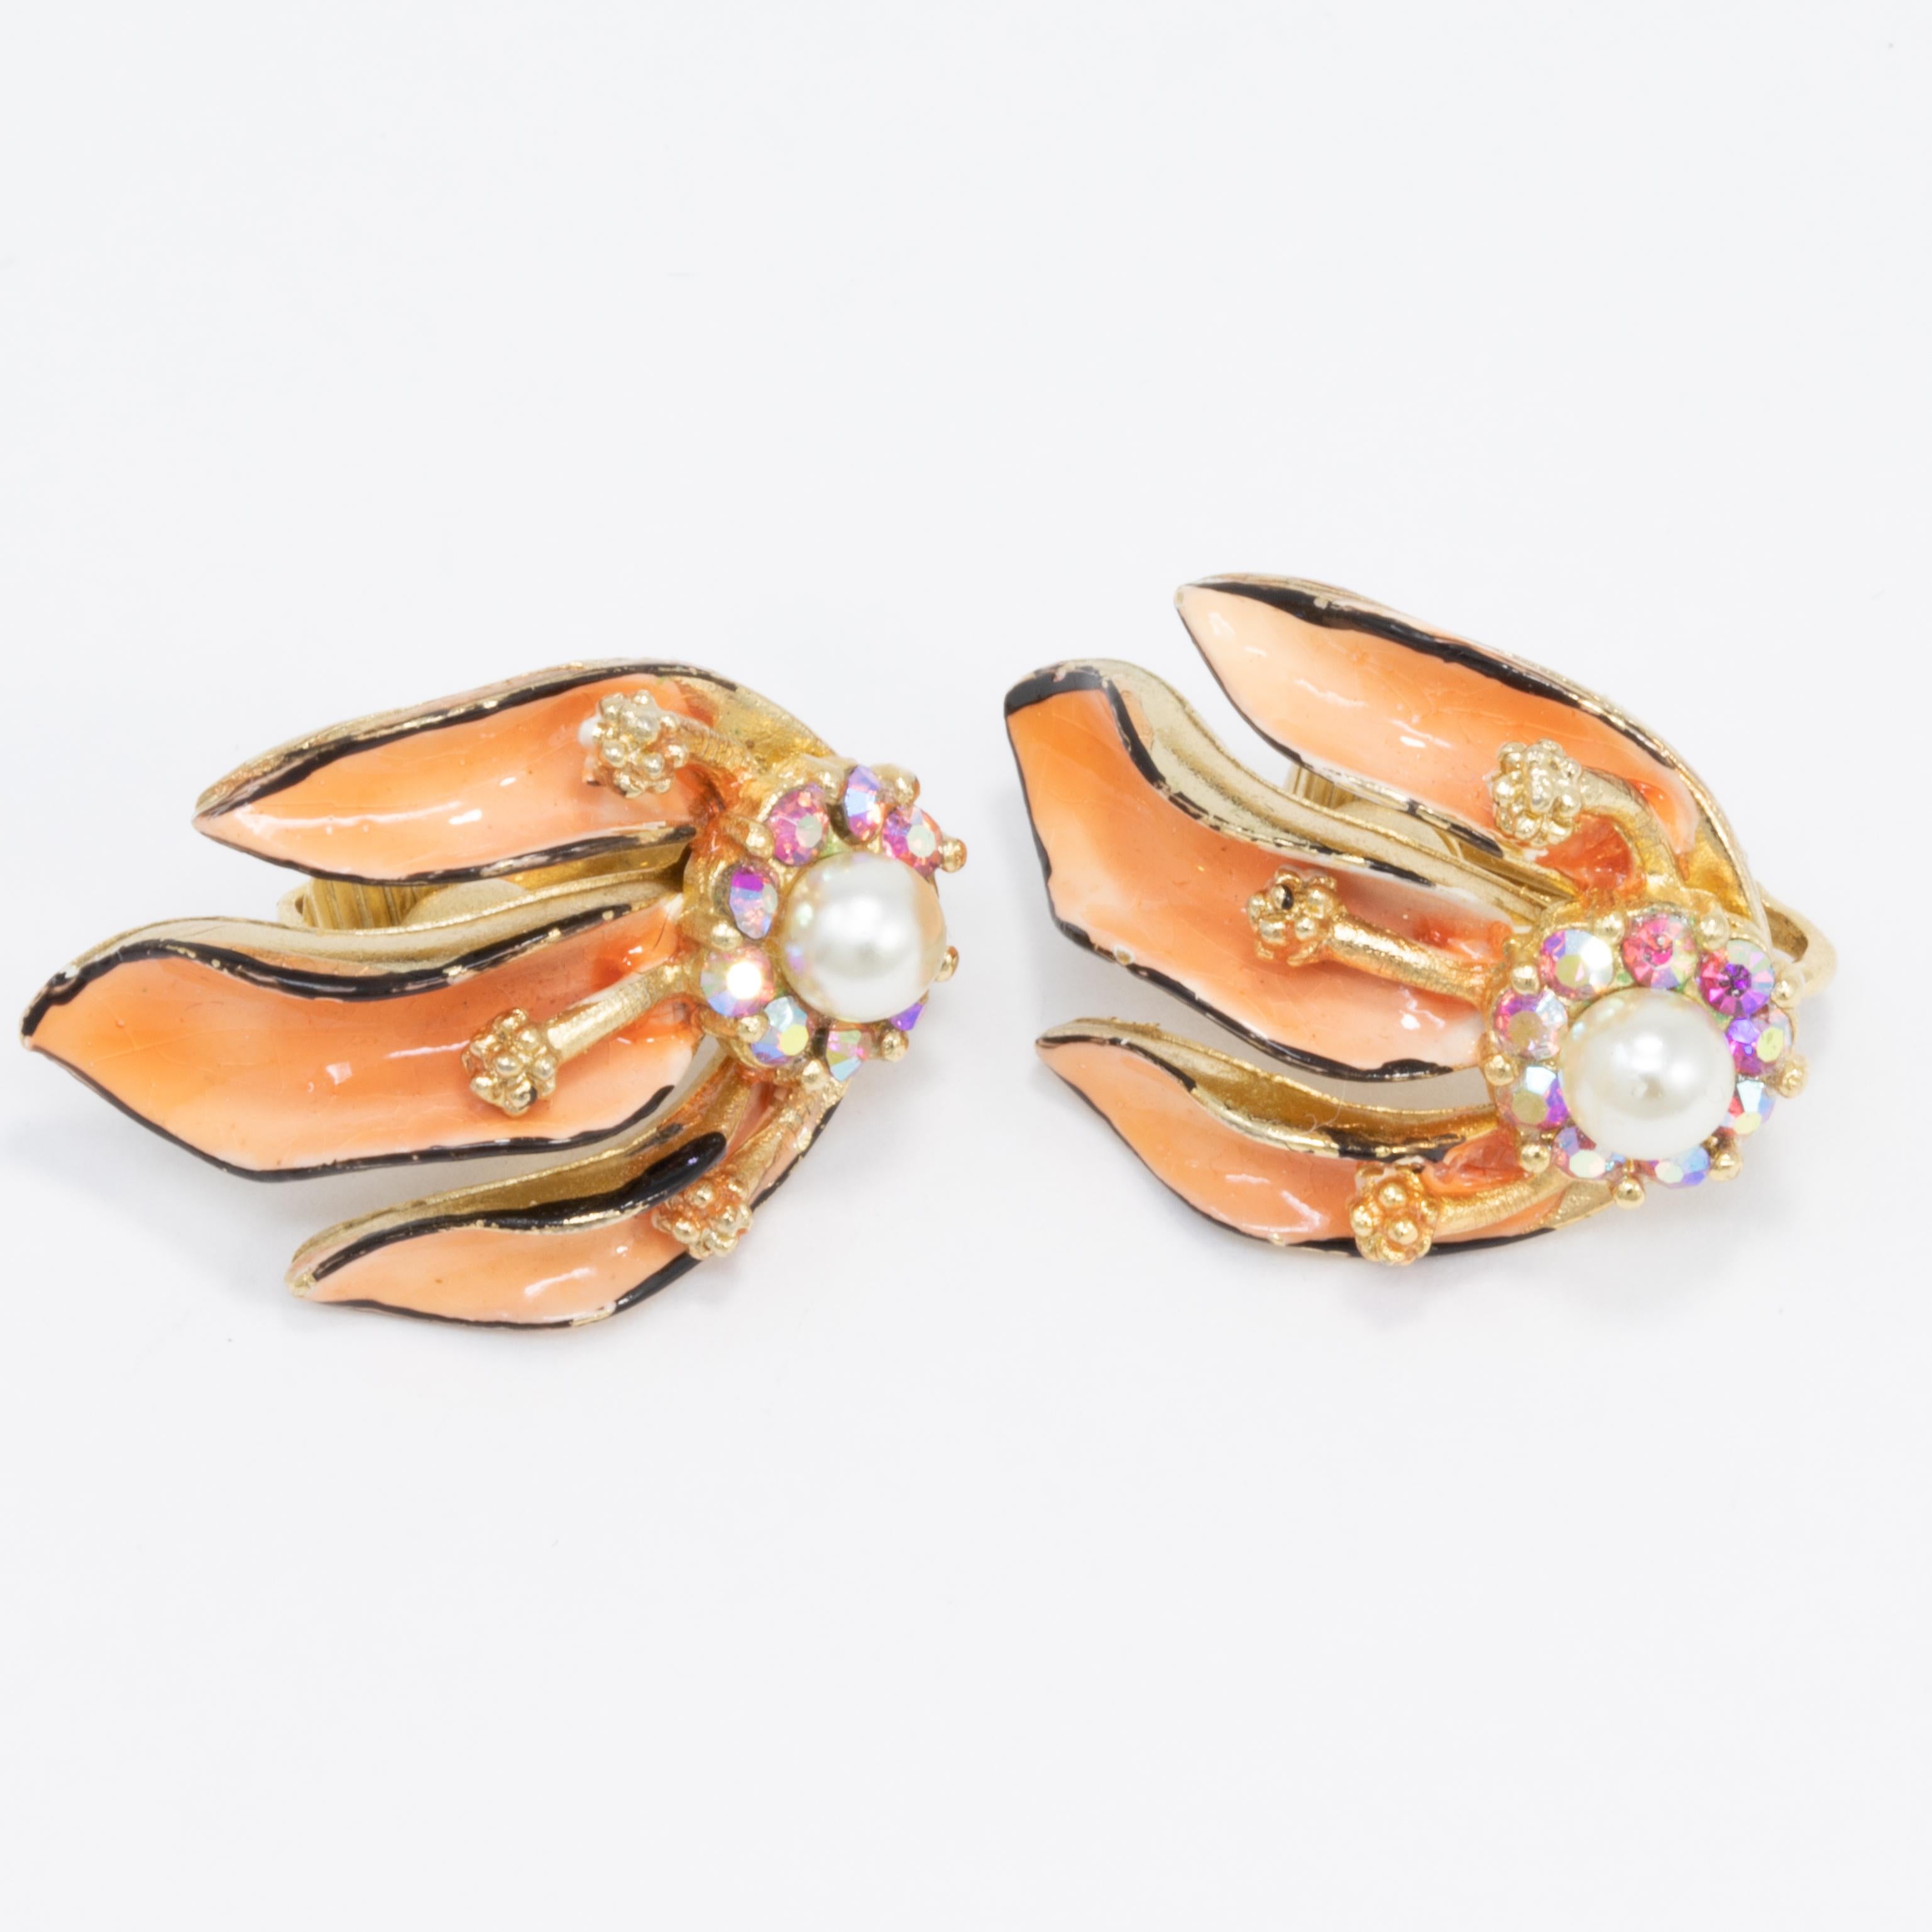 A pair of vintage clip on earrings by Lisner. Features gold-plated floral motifs painted with enamel and decorated with faux pearls & aurora borealis crystals.

Gold-plated.

Hallmarks: Lisner